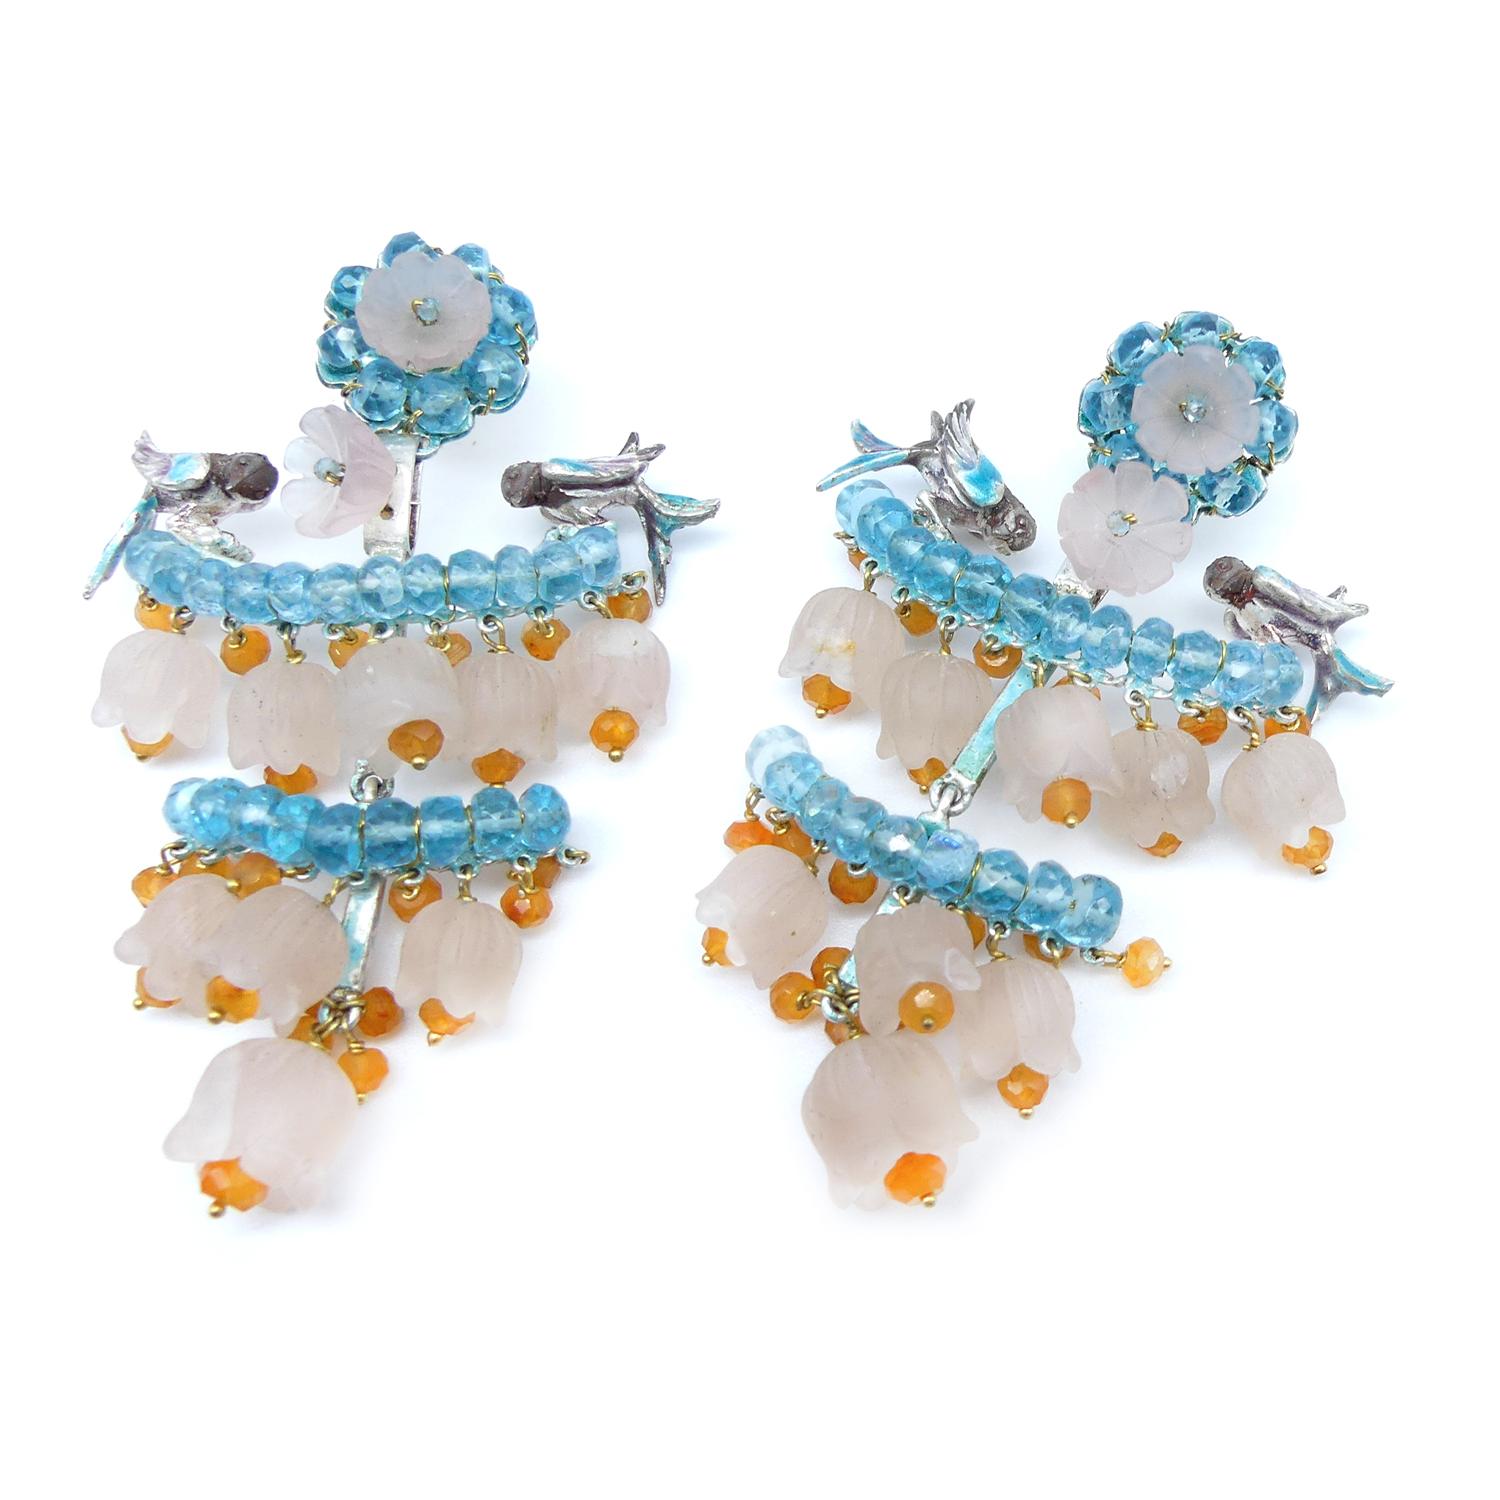 21st Century Sapphires Apatite Birds Oranges Flowers Silver Enameled Earrings

Quartz Sapphires Apatite Traditional Valencian Silver enameled Earrings Vicente Gracia

These earrings are part of the collection inspired by the Valencian Traditional